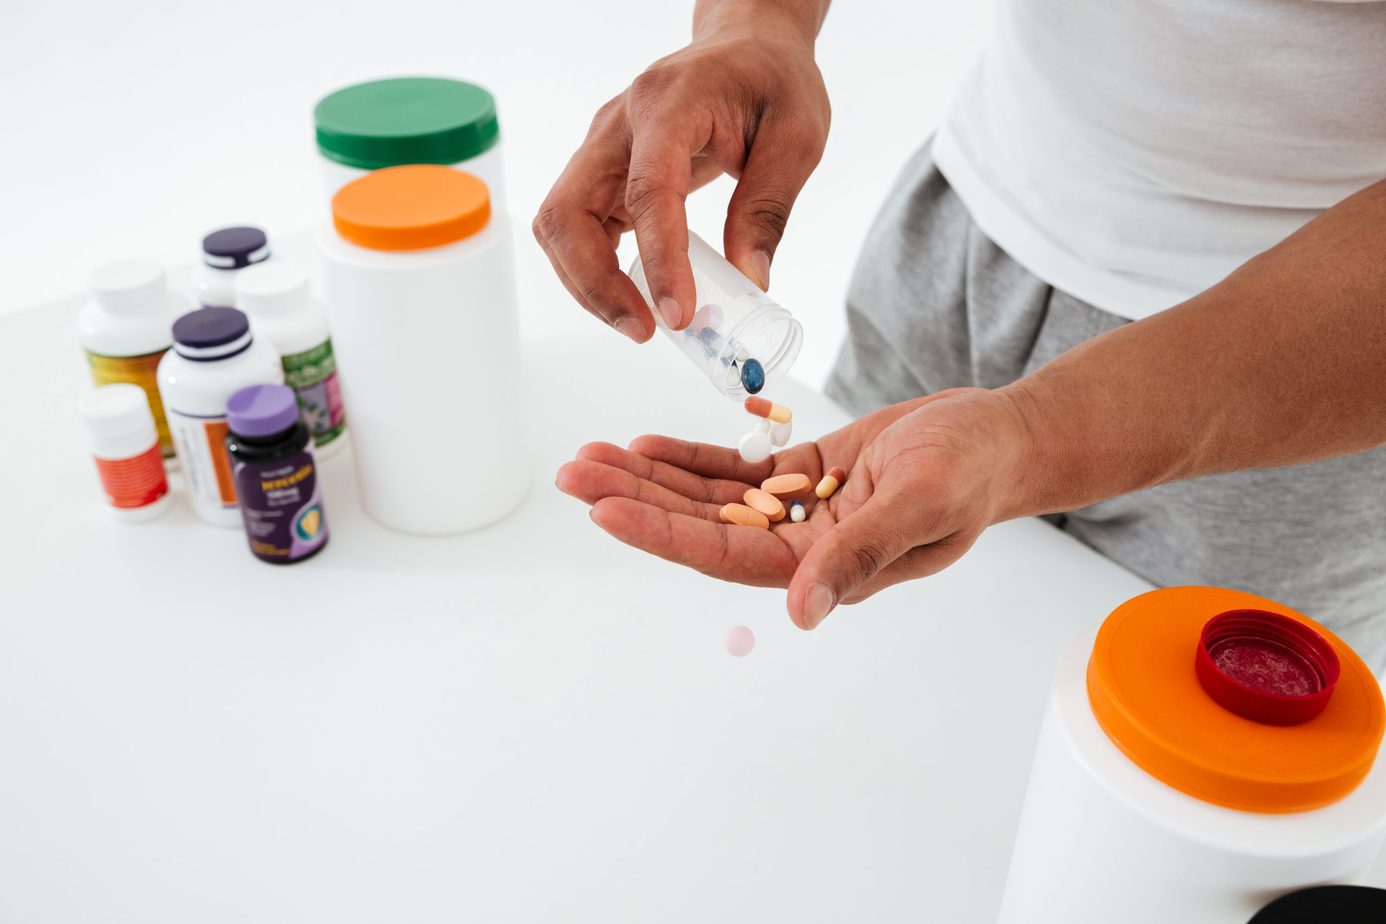 How does ibuprofen affect muscle and strength?